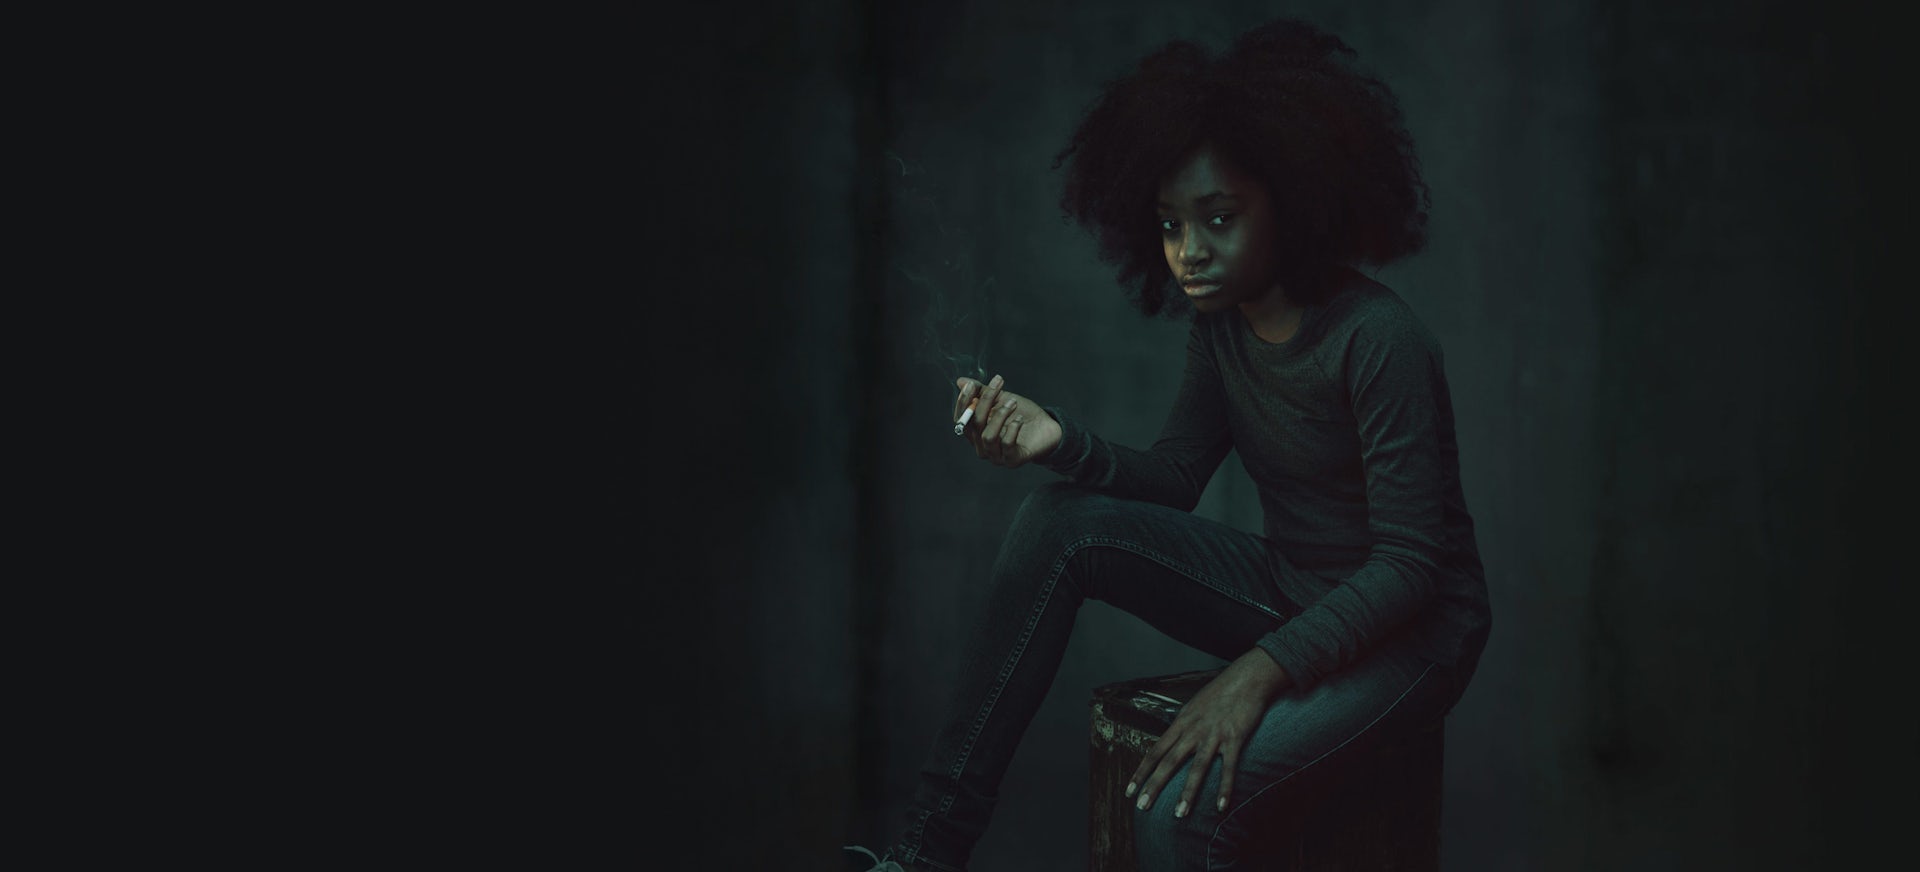 A young African American/Black teen girl sitting on a stool in a dark room holding a cigarette